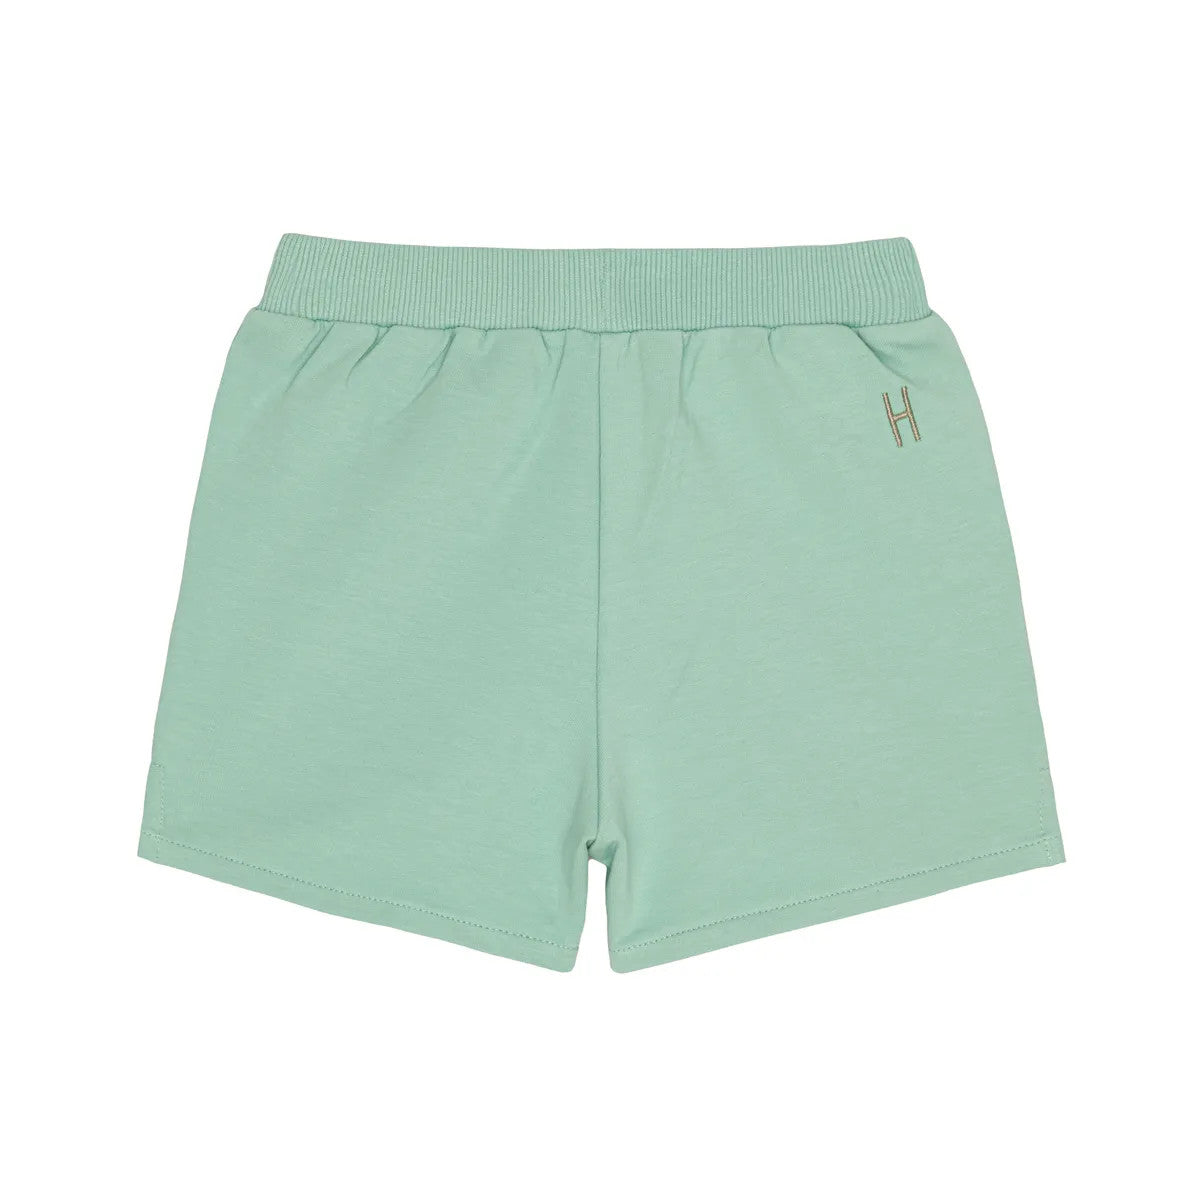 Little Hedonist organic cotton shorts with side pockets and splits for boys and girls in Neptune Green